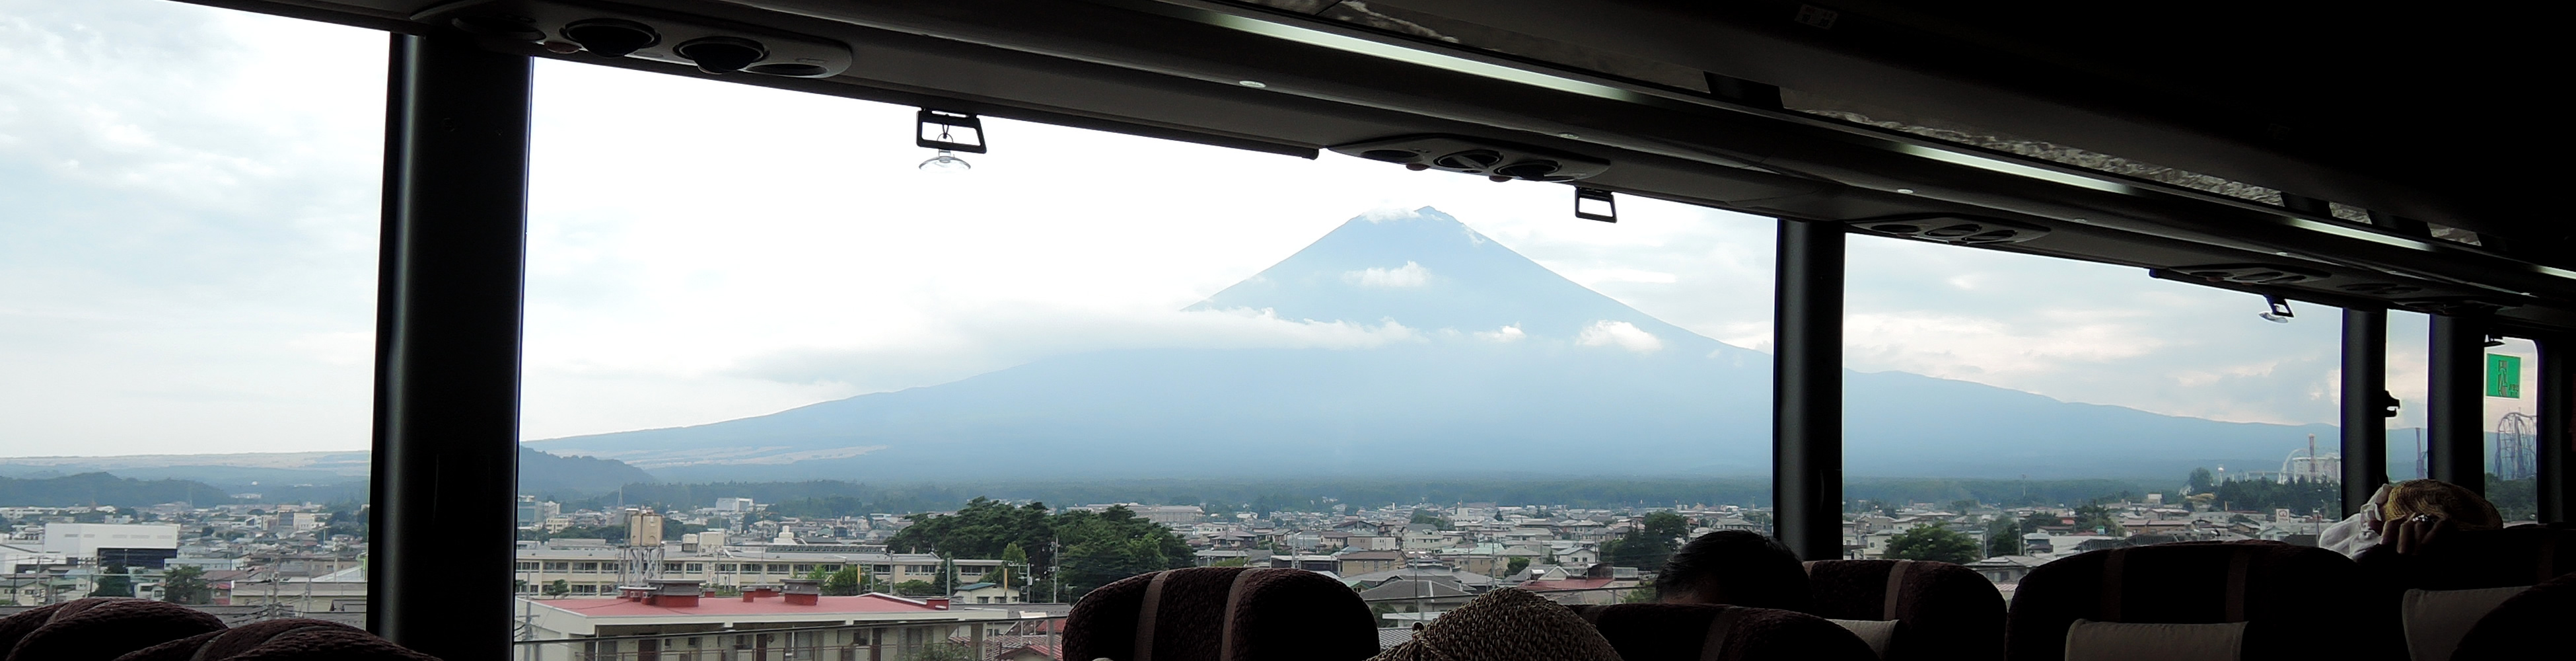 Mt.Fuji from Bus